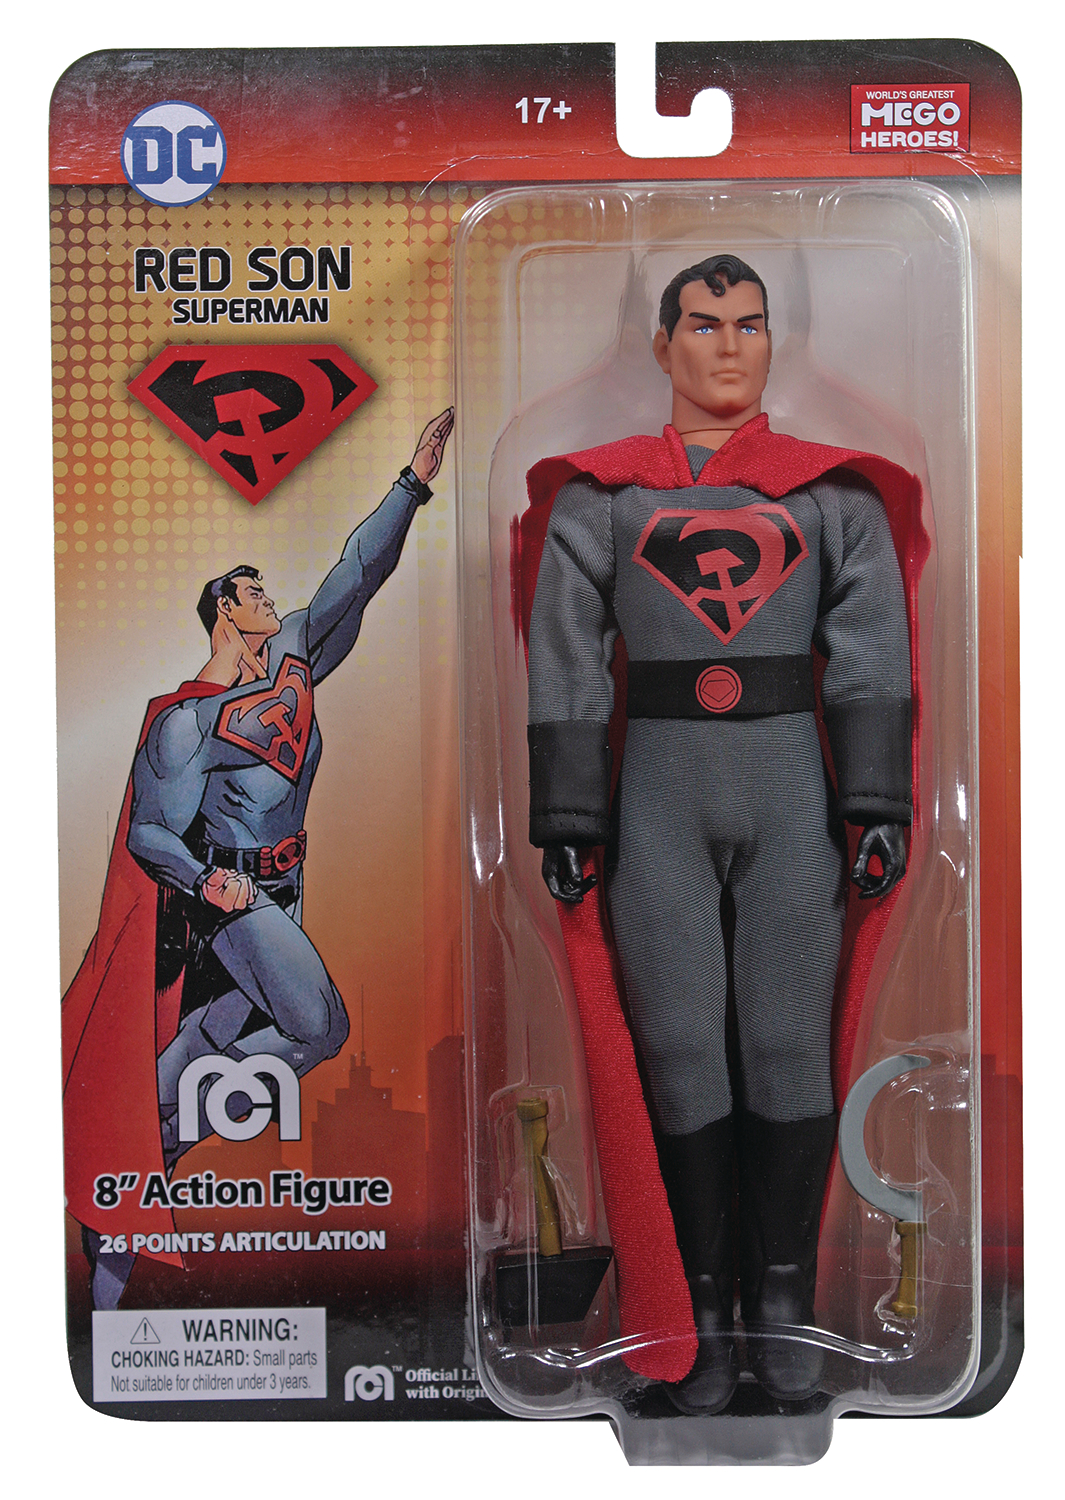 Mego DC Heroes Red Son Superman 8-Inch Action Figure